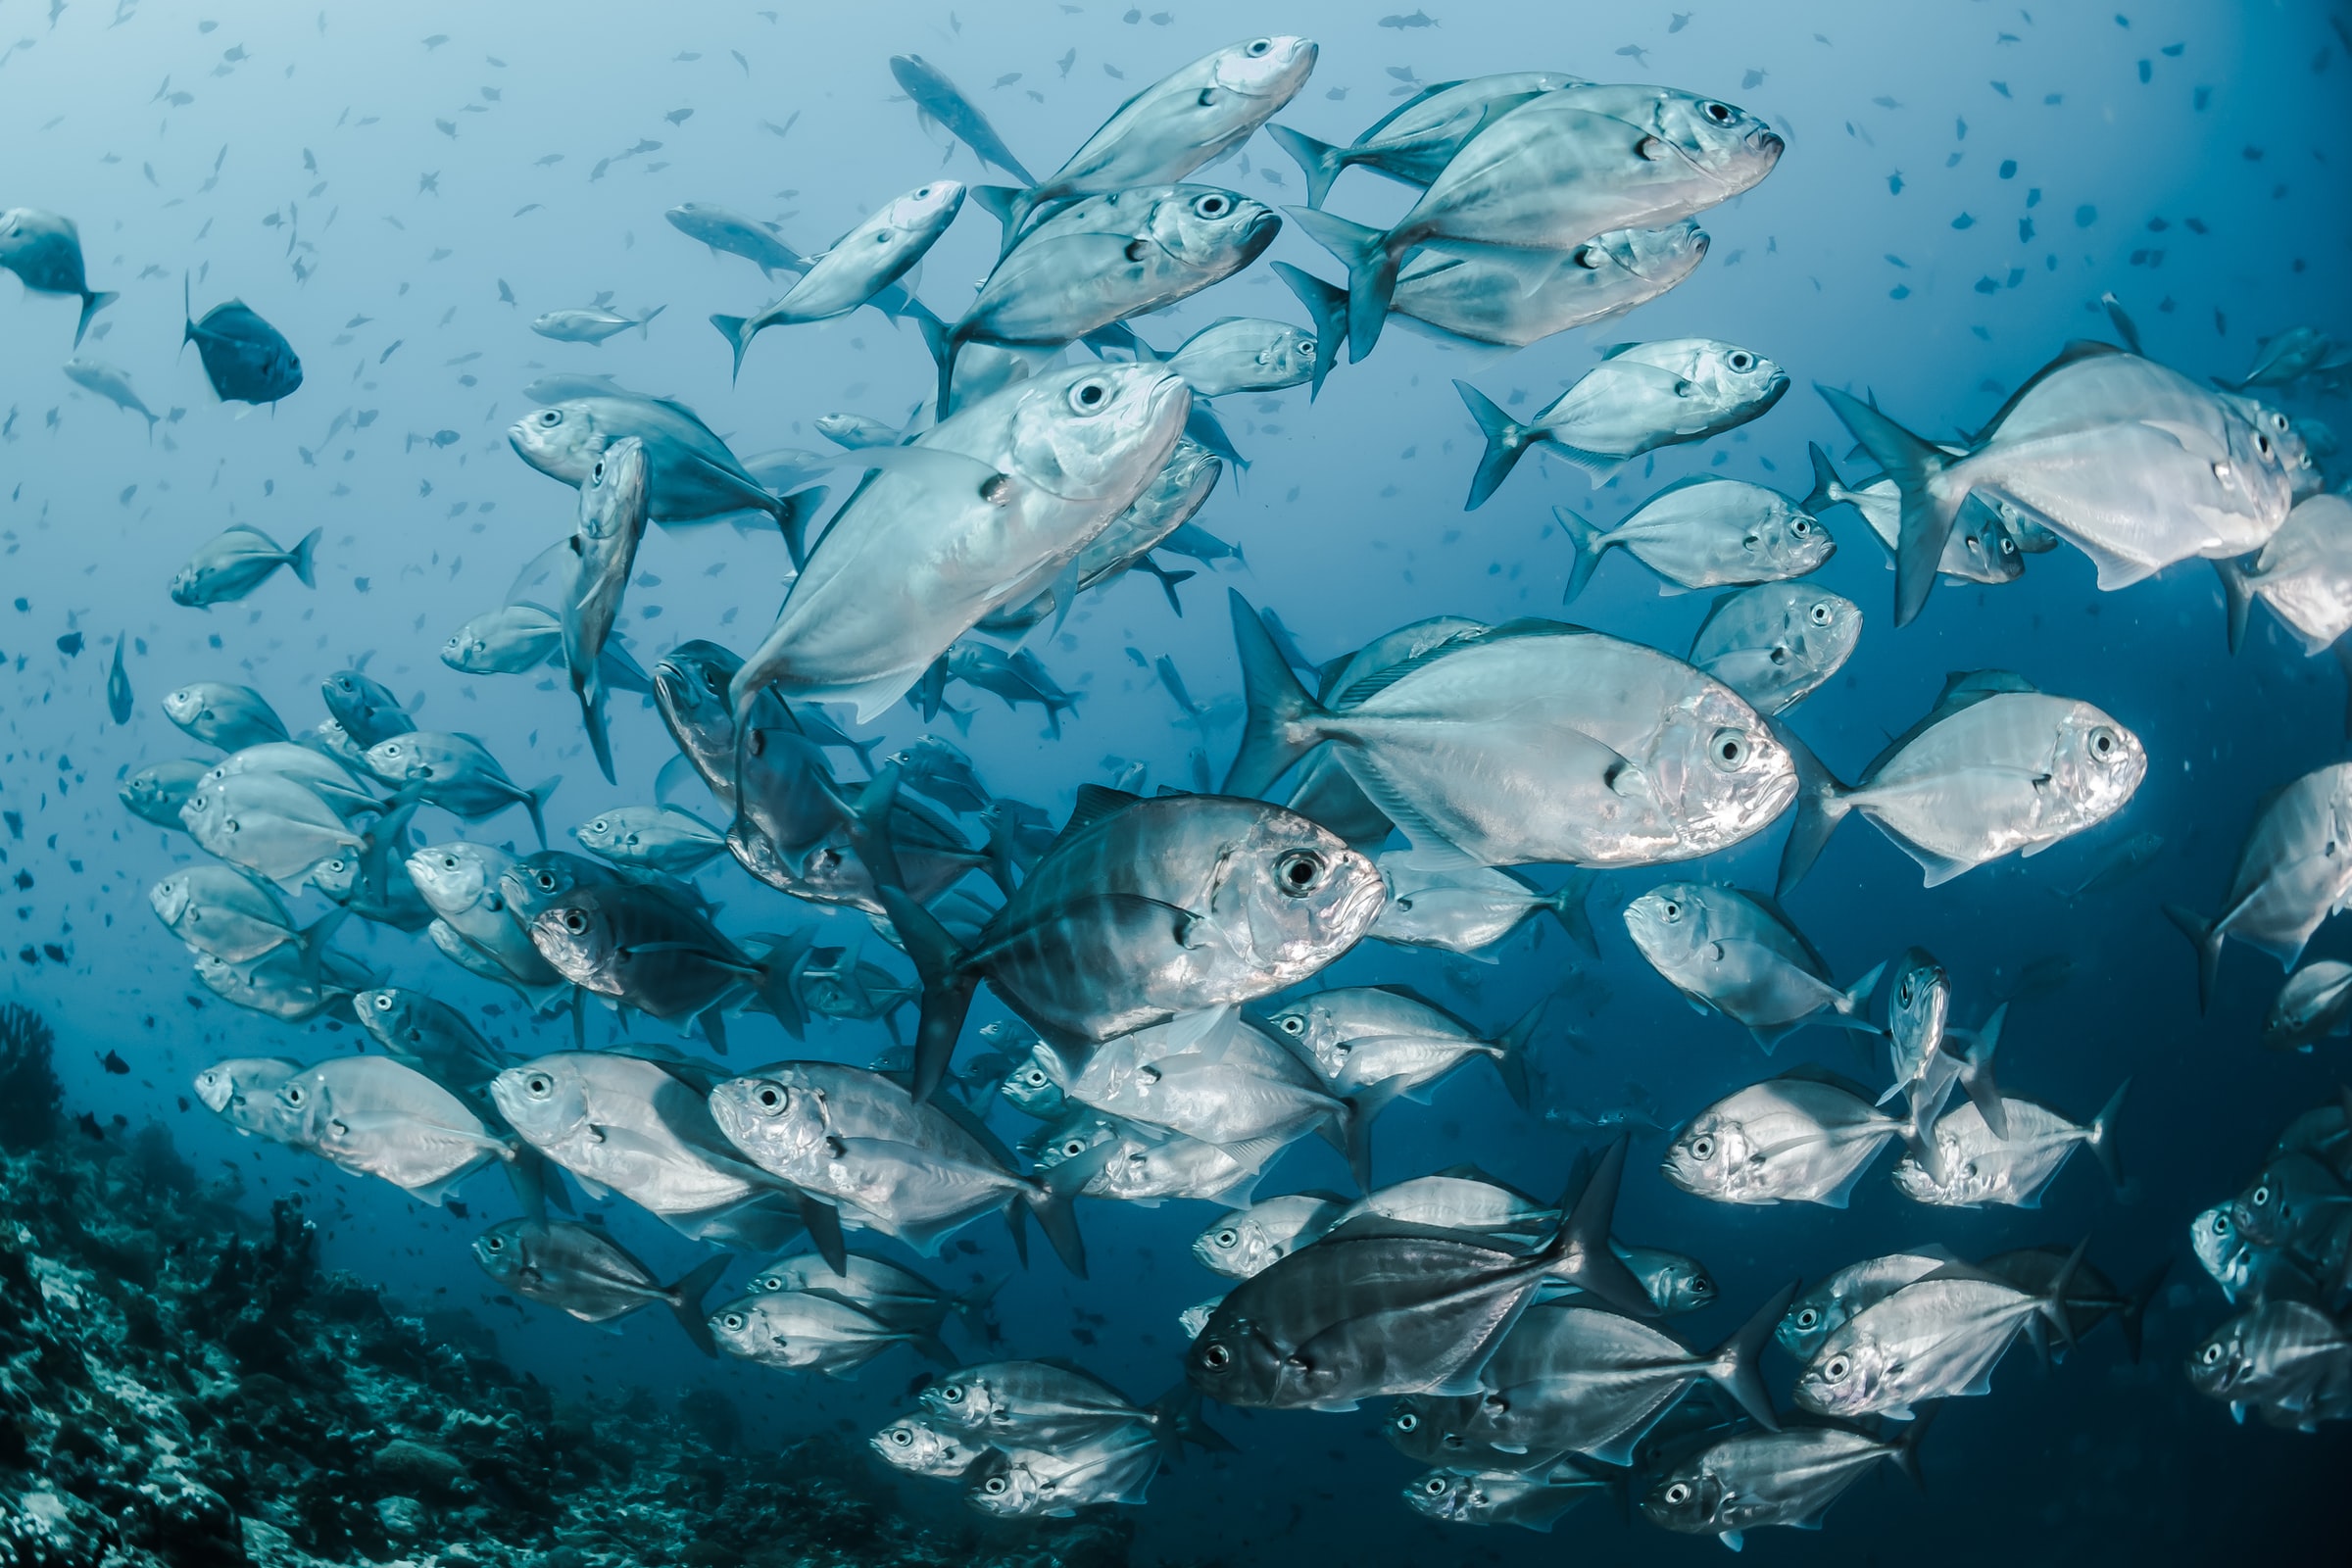 Image of a school of fish.